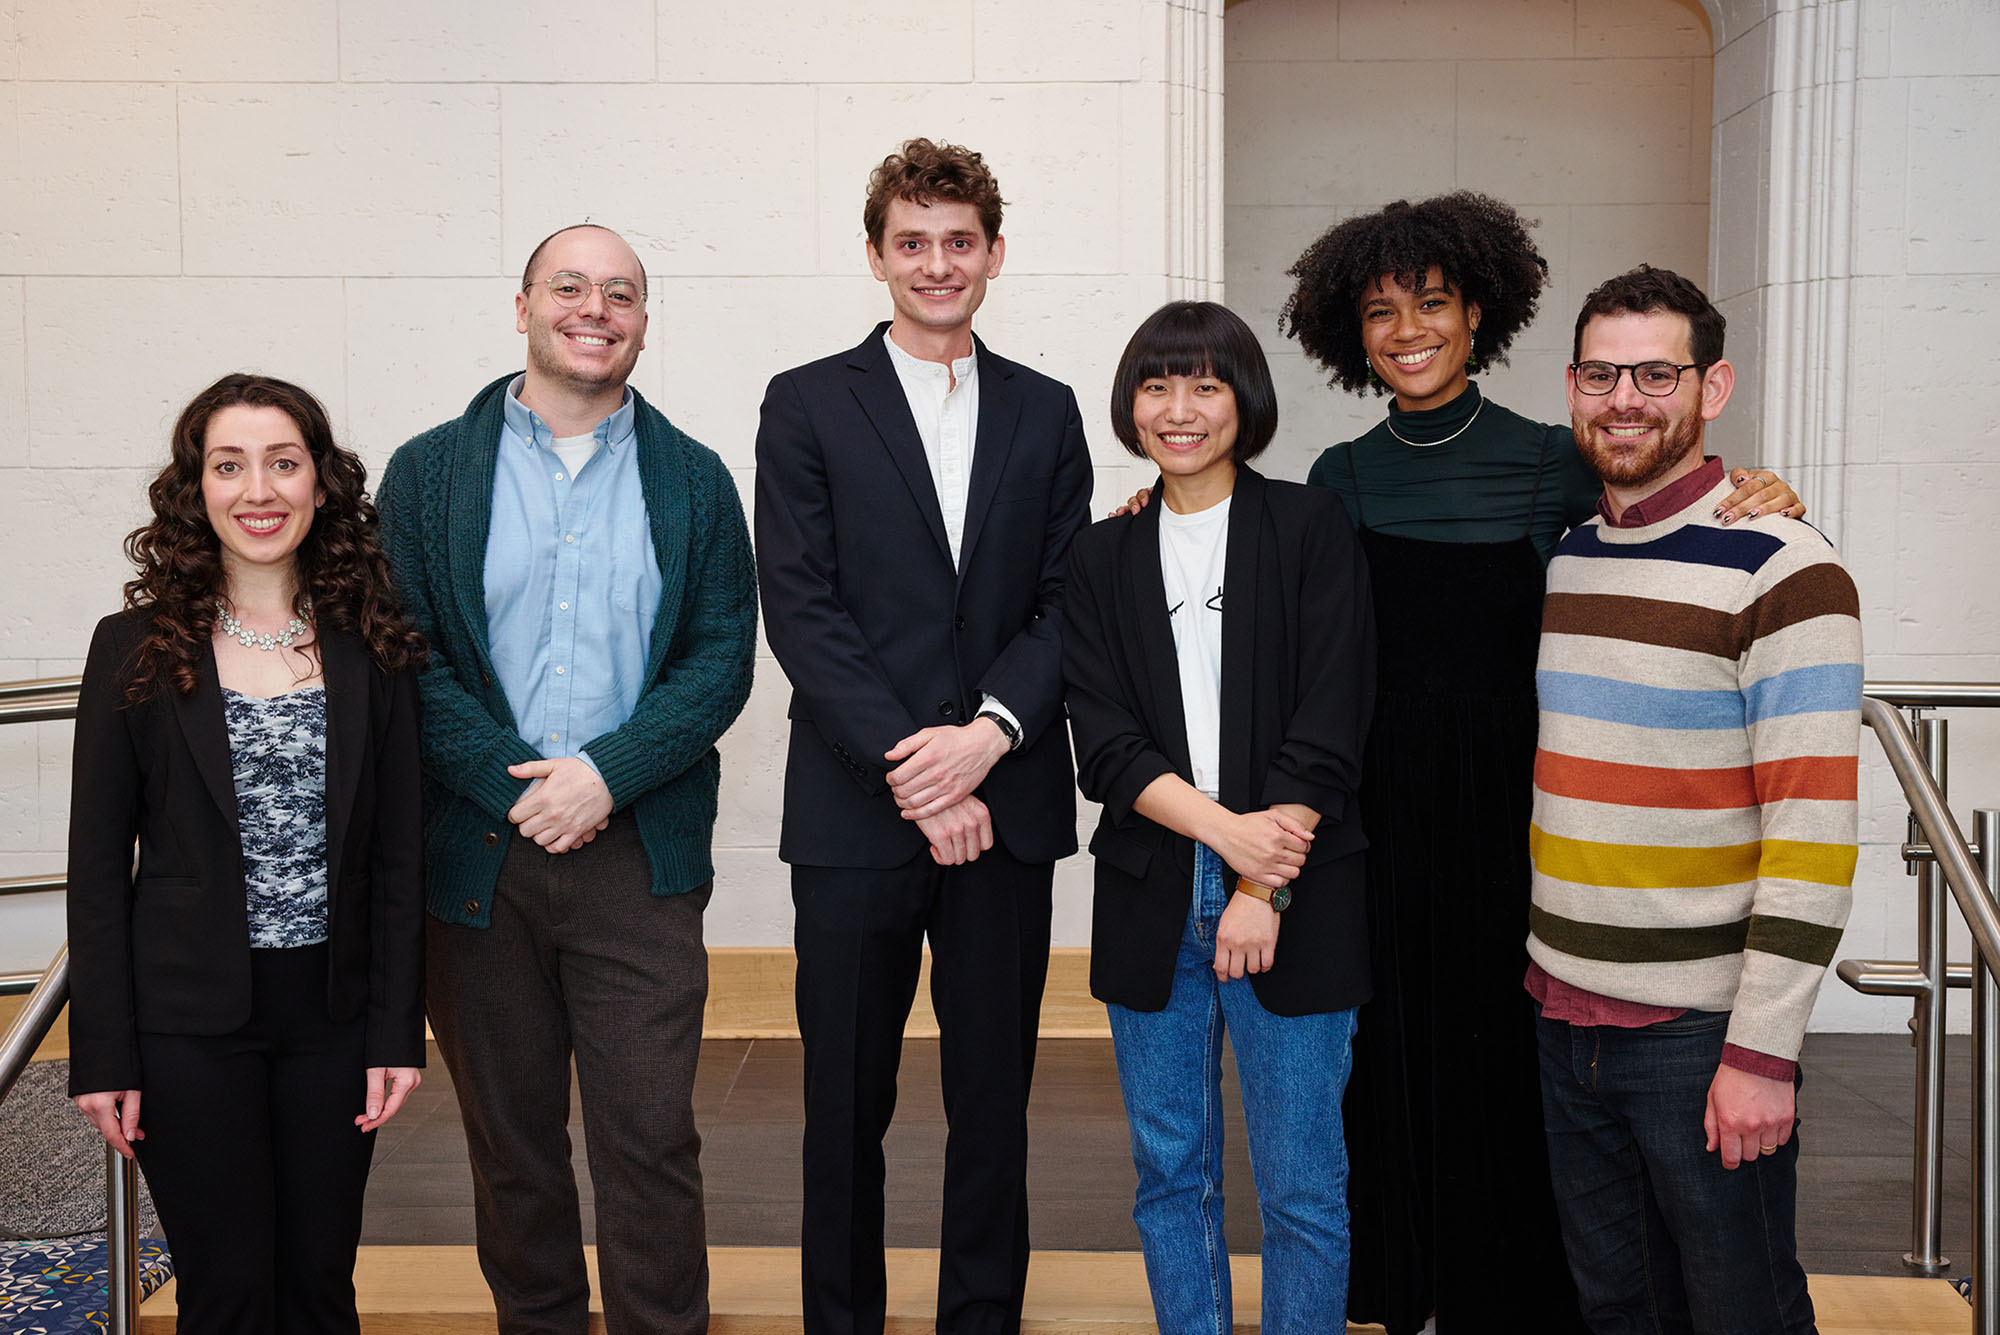 Photo of this year’s Kahn winners (from left): Savannah Panah (CFA’22), music and vocal performance (from left), Devon Russo (CFA’22), music and vocal performance, grand prize winner Gavin Fahey (CFA’22), painting, Chen Peng (CFA’22), painting, Mya Ison (CFA’22), theater arts and performance, and Noah Putterman (CFA’22), directing. A group of students dressed in business casual wear stand in a line and pose for the camera.